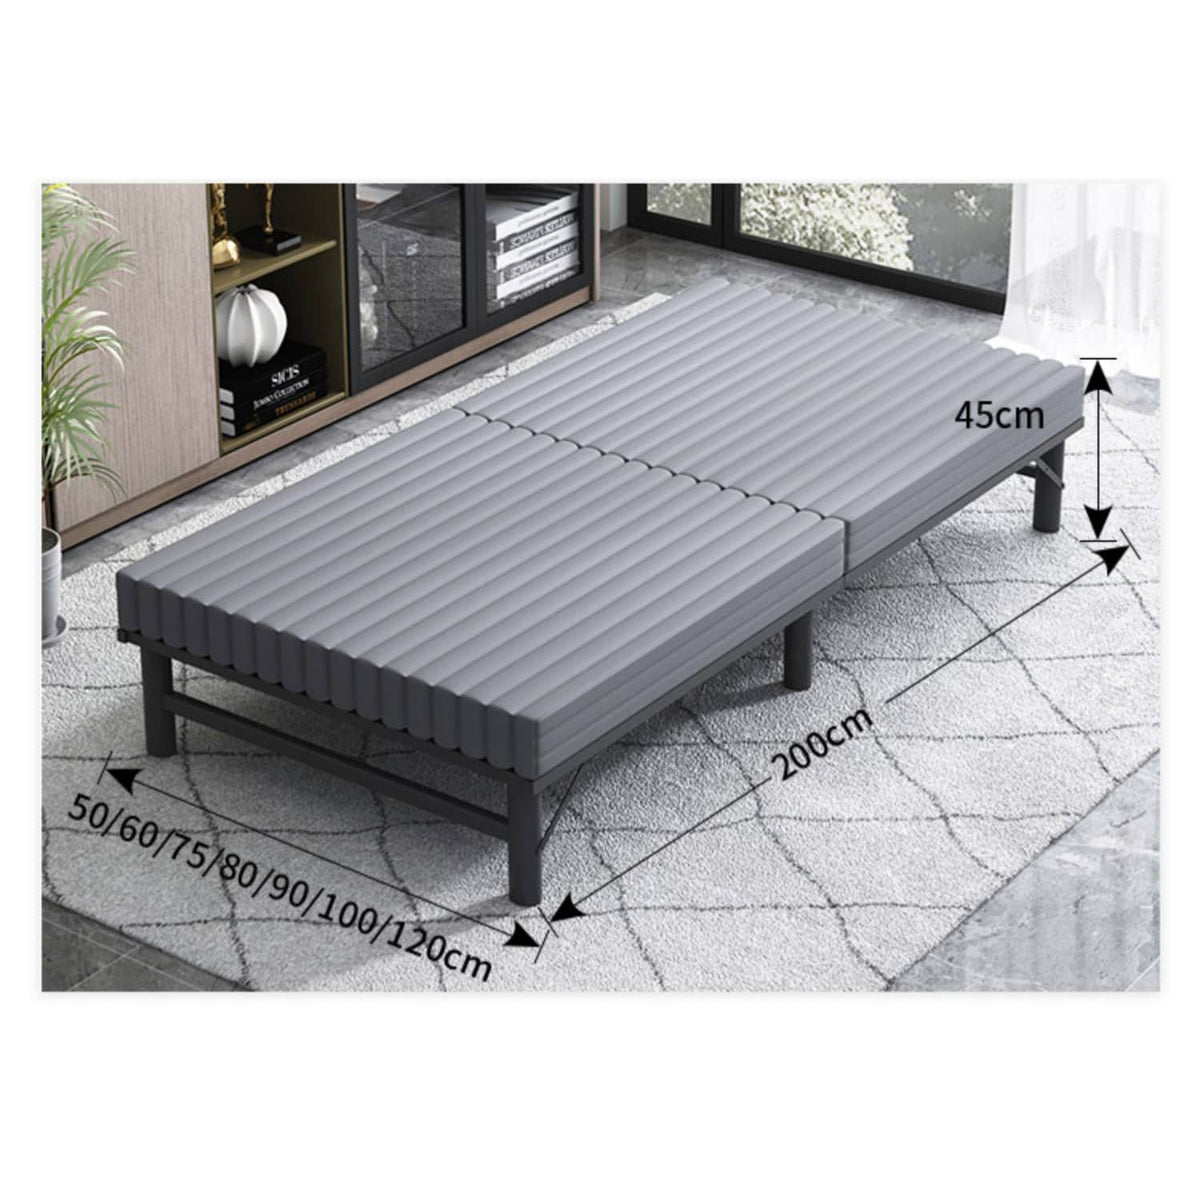 Ultimate Comfort Bed - Stylish Design in Green, Black & Brown with High-Quality Foam and Durable Laminated Wood fcsnm-907